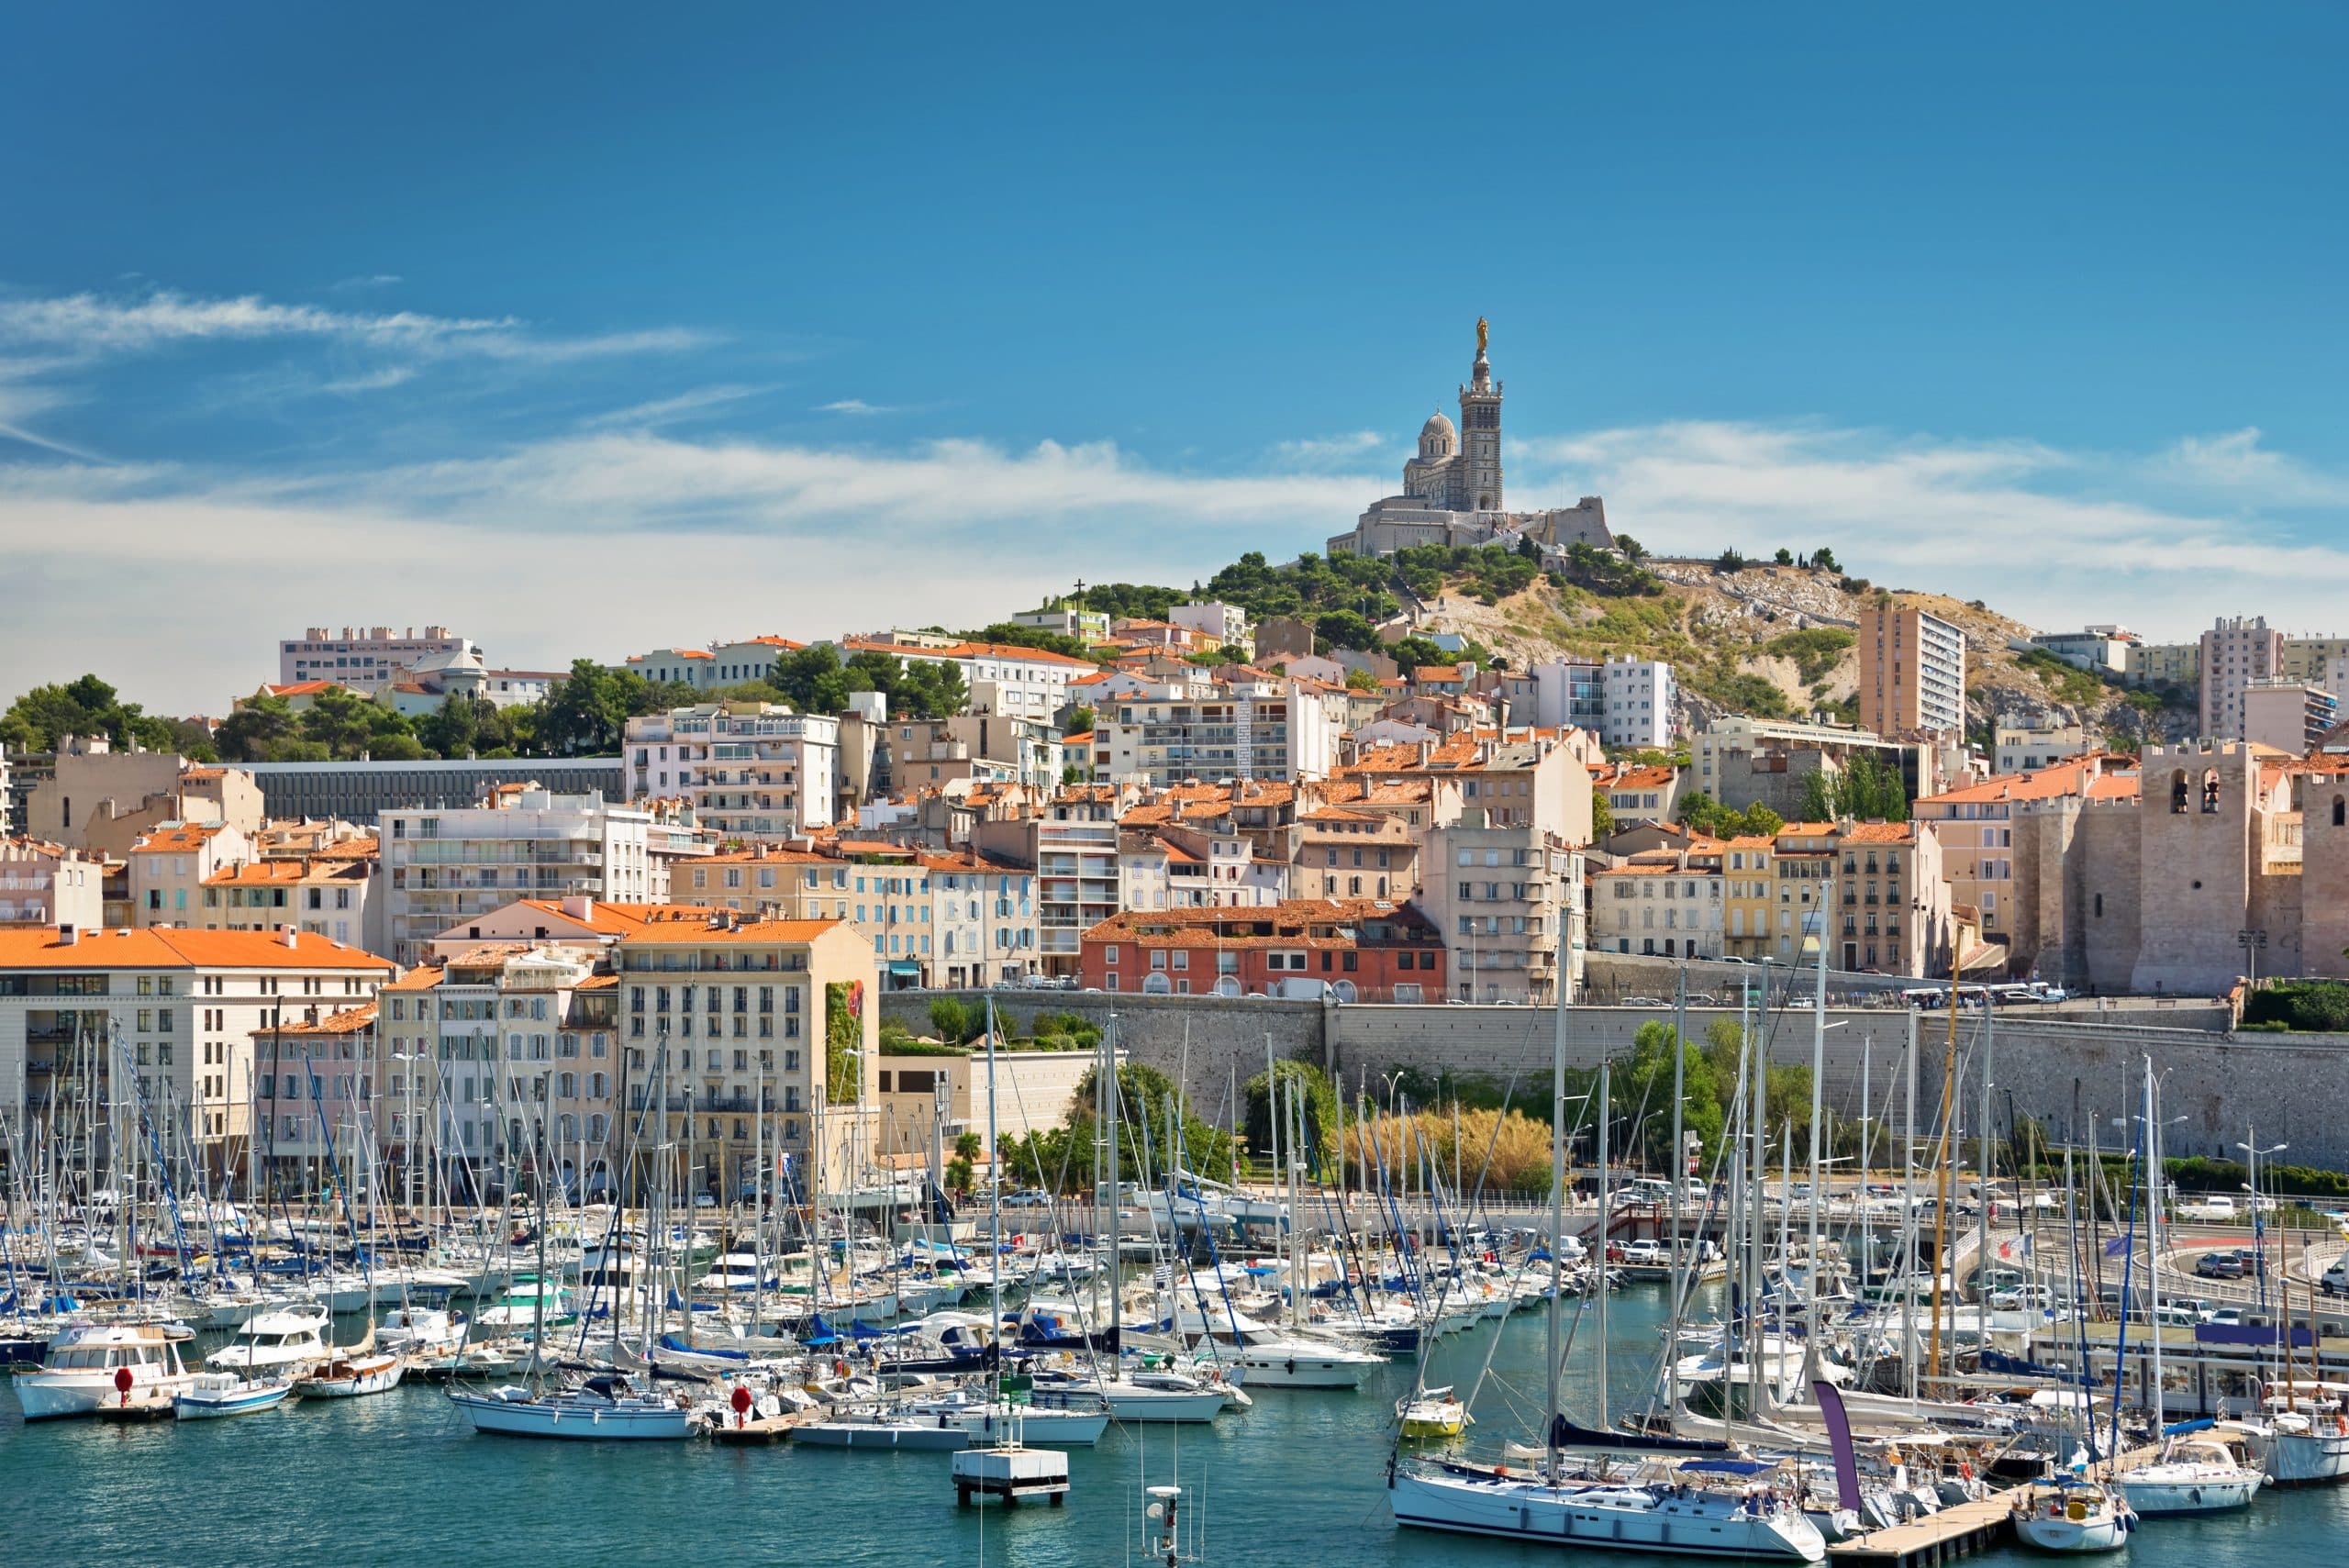 agence immobiliere marseille